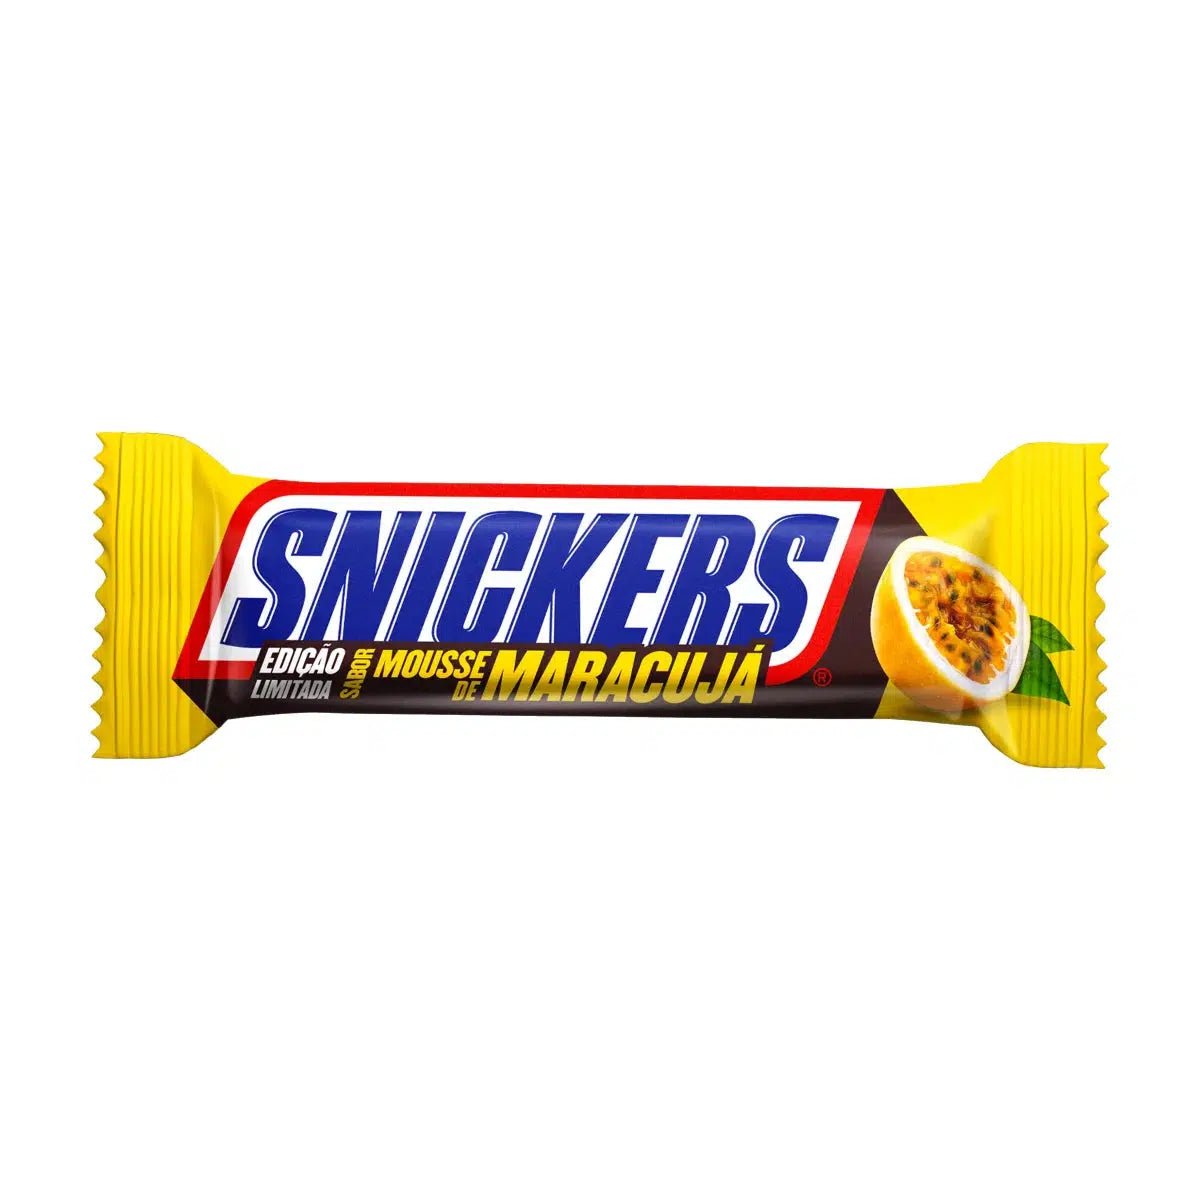 Snickers Passionfruit Mousse (Brazil) 45g - Candy Mail UK